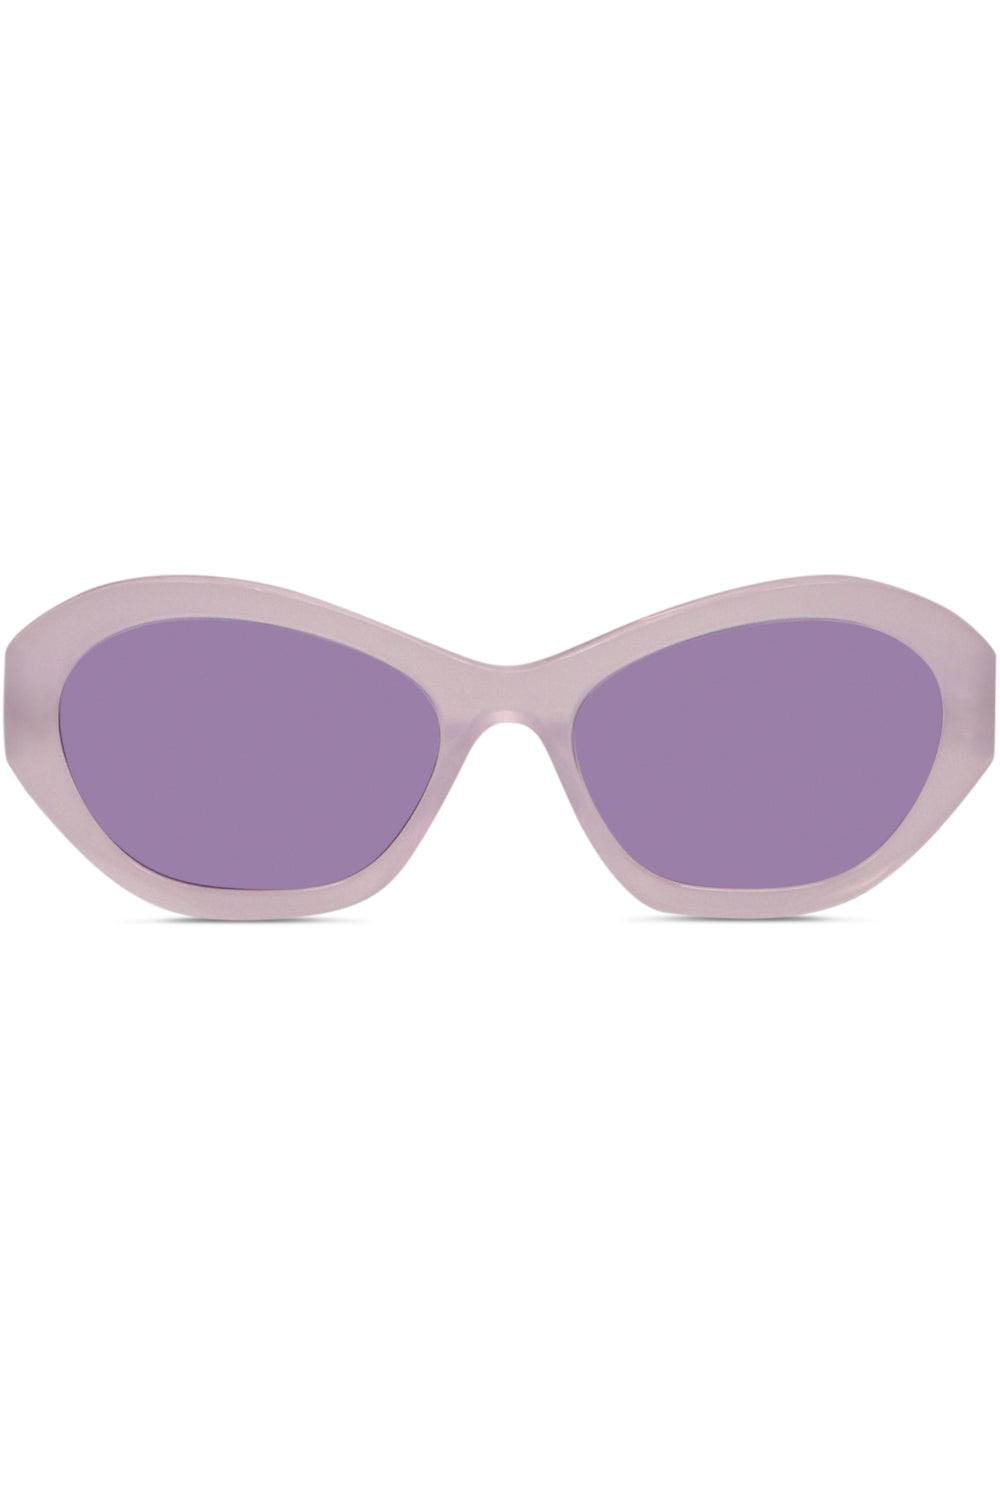 GIVENCHY ACCESSORIES MULTI RECTANGLE SUNGLASSES | CLEAR PURPLE